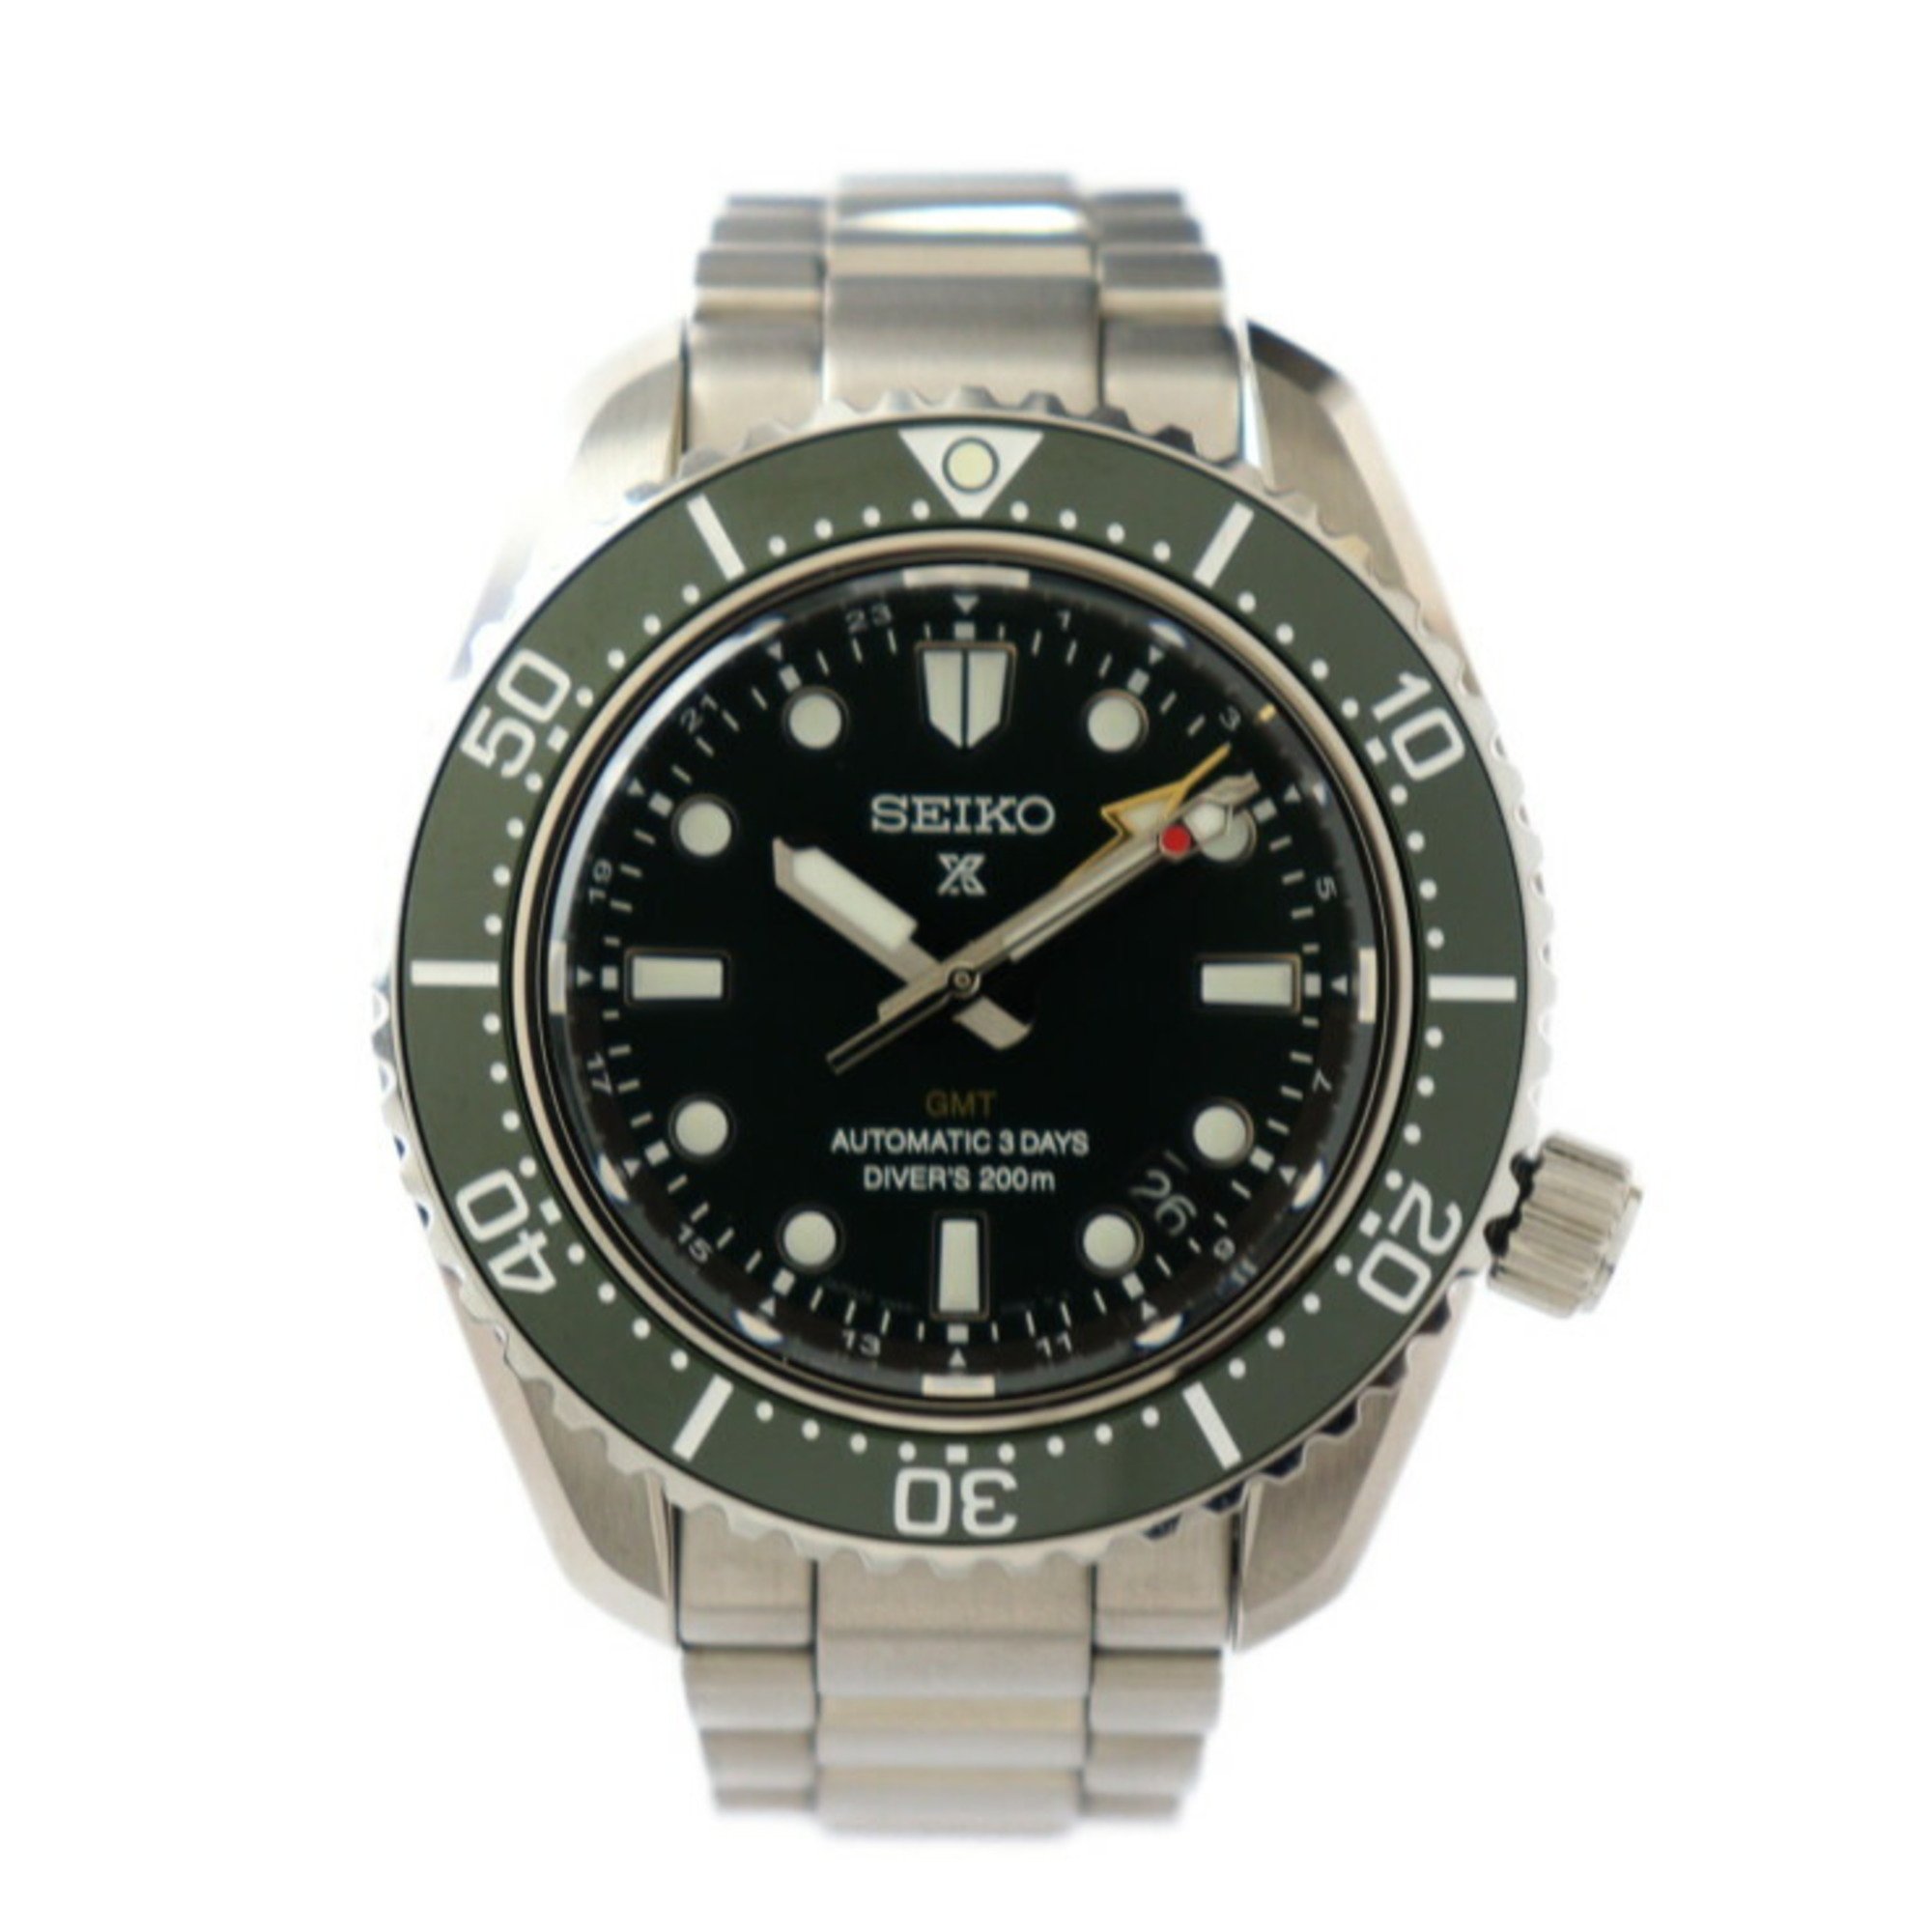 SEIKO Prospex Diver Scuba Watch SBEJ009 / 6R54-0DD0 Stainless Steel Silver Green Dial Mechanical Divers 1968 Heritage GMT Automatic Winding